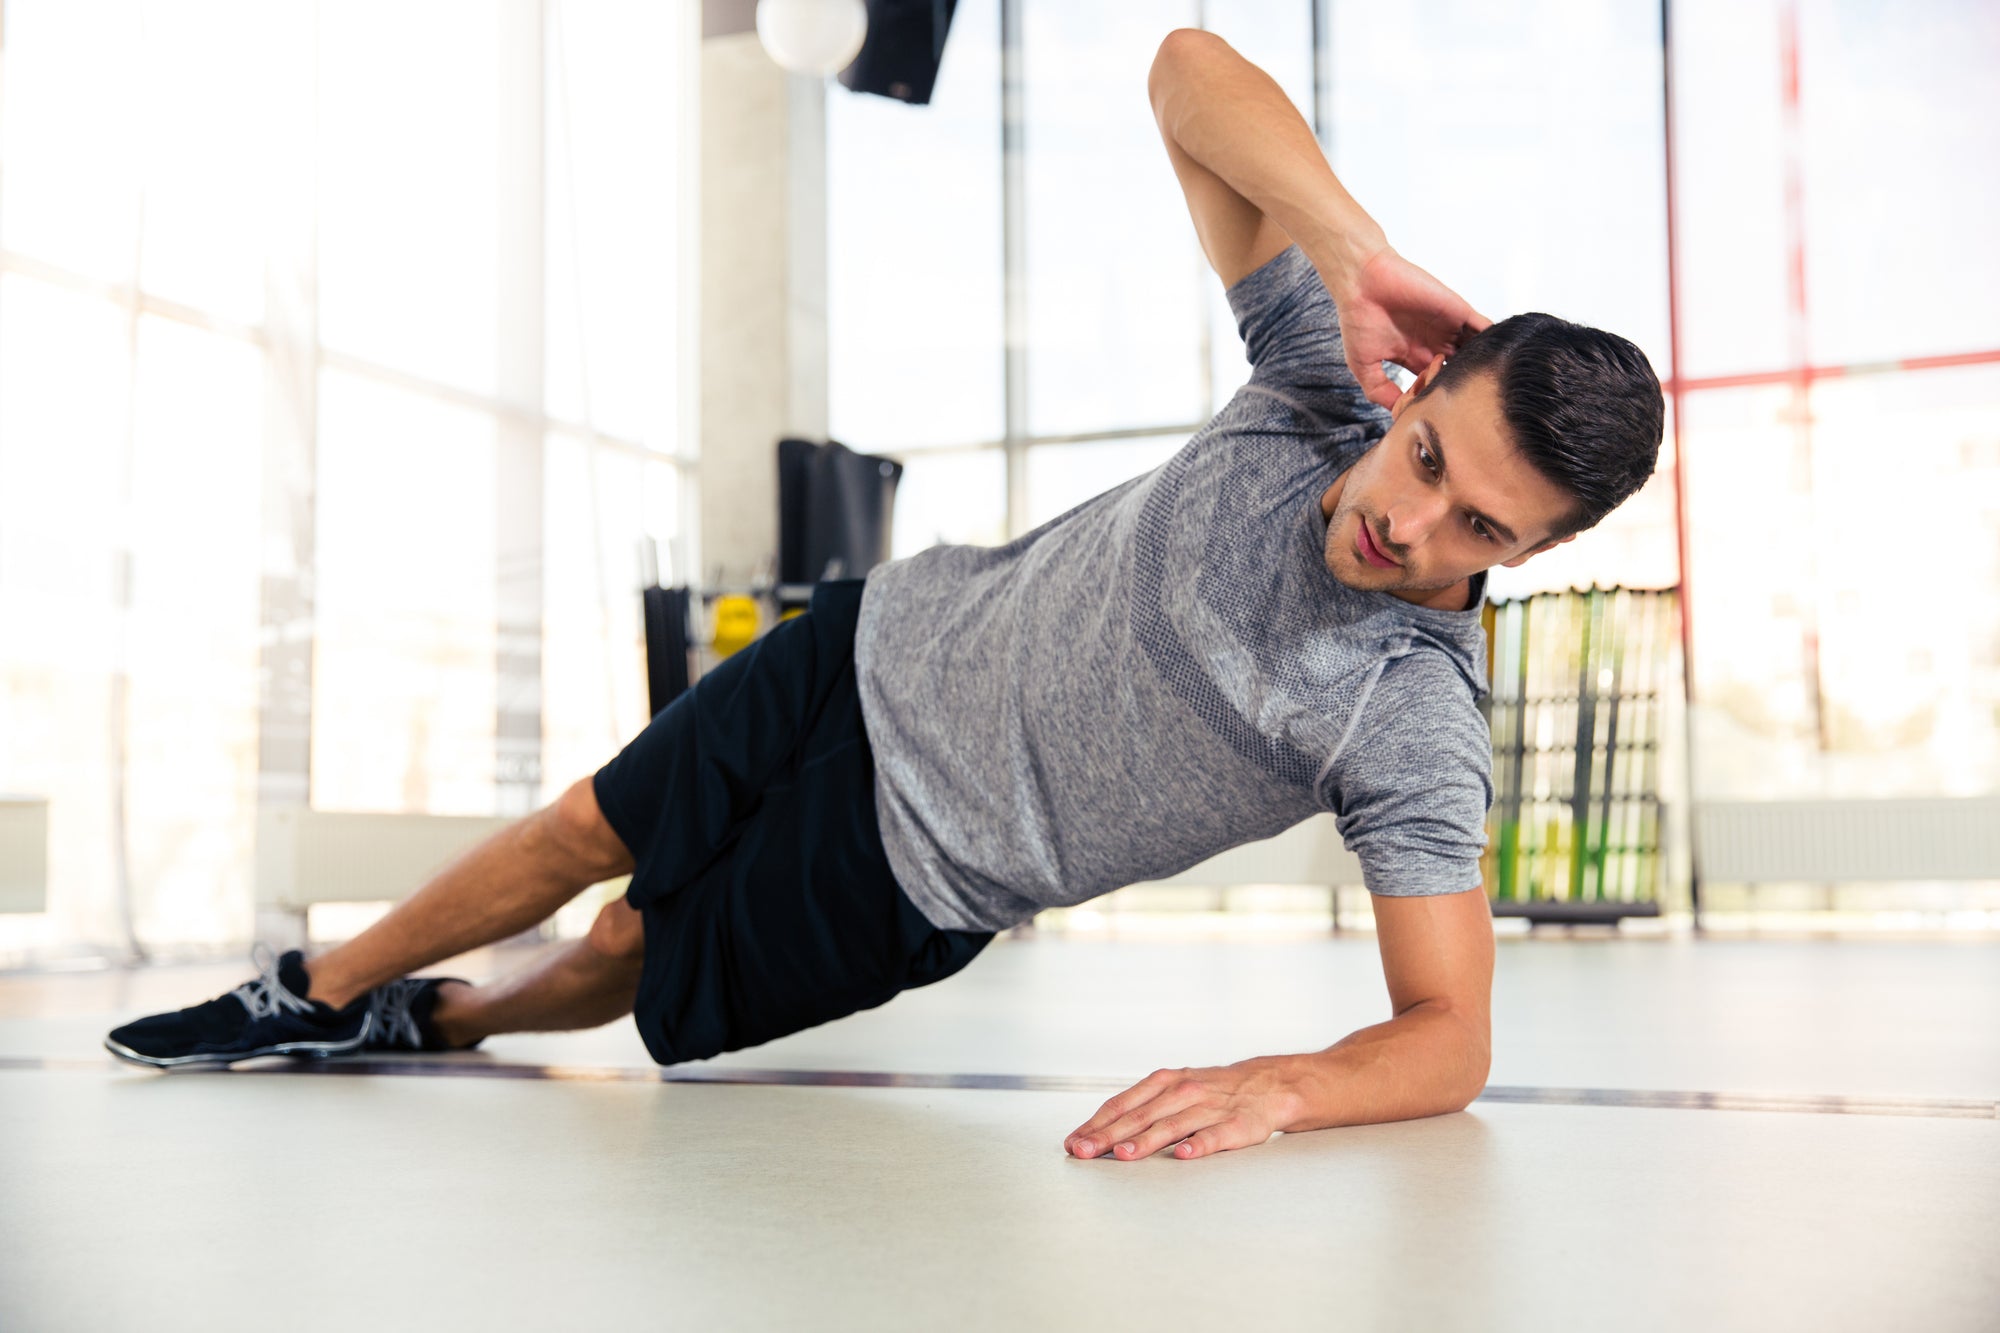 How to Do A Side Plank + Hip Lift Properly